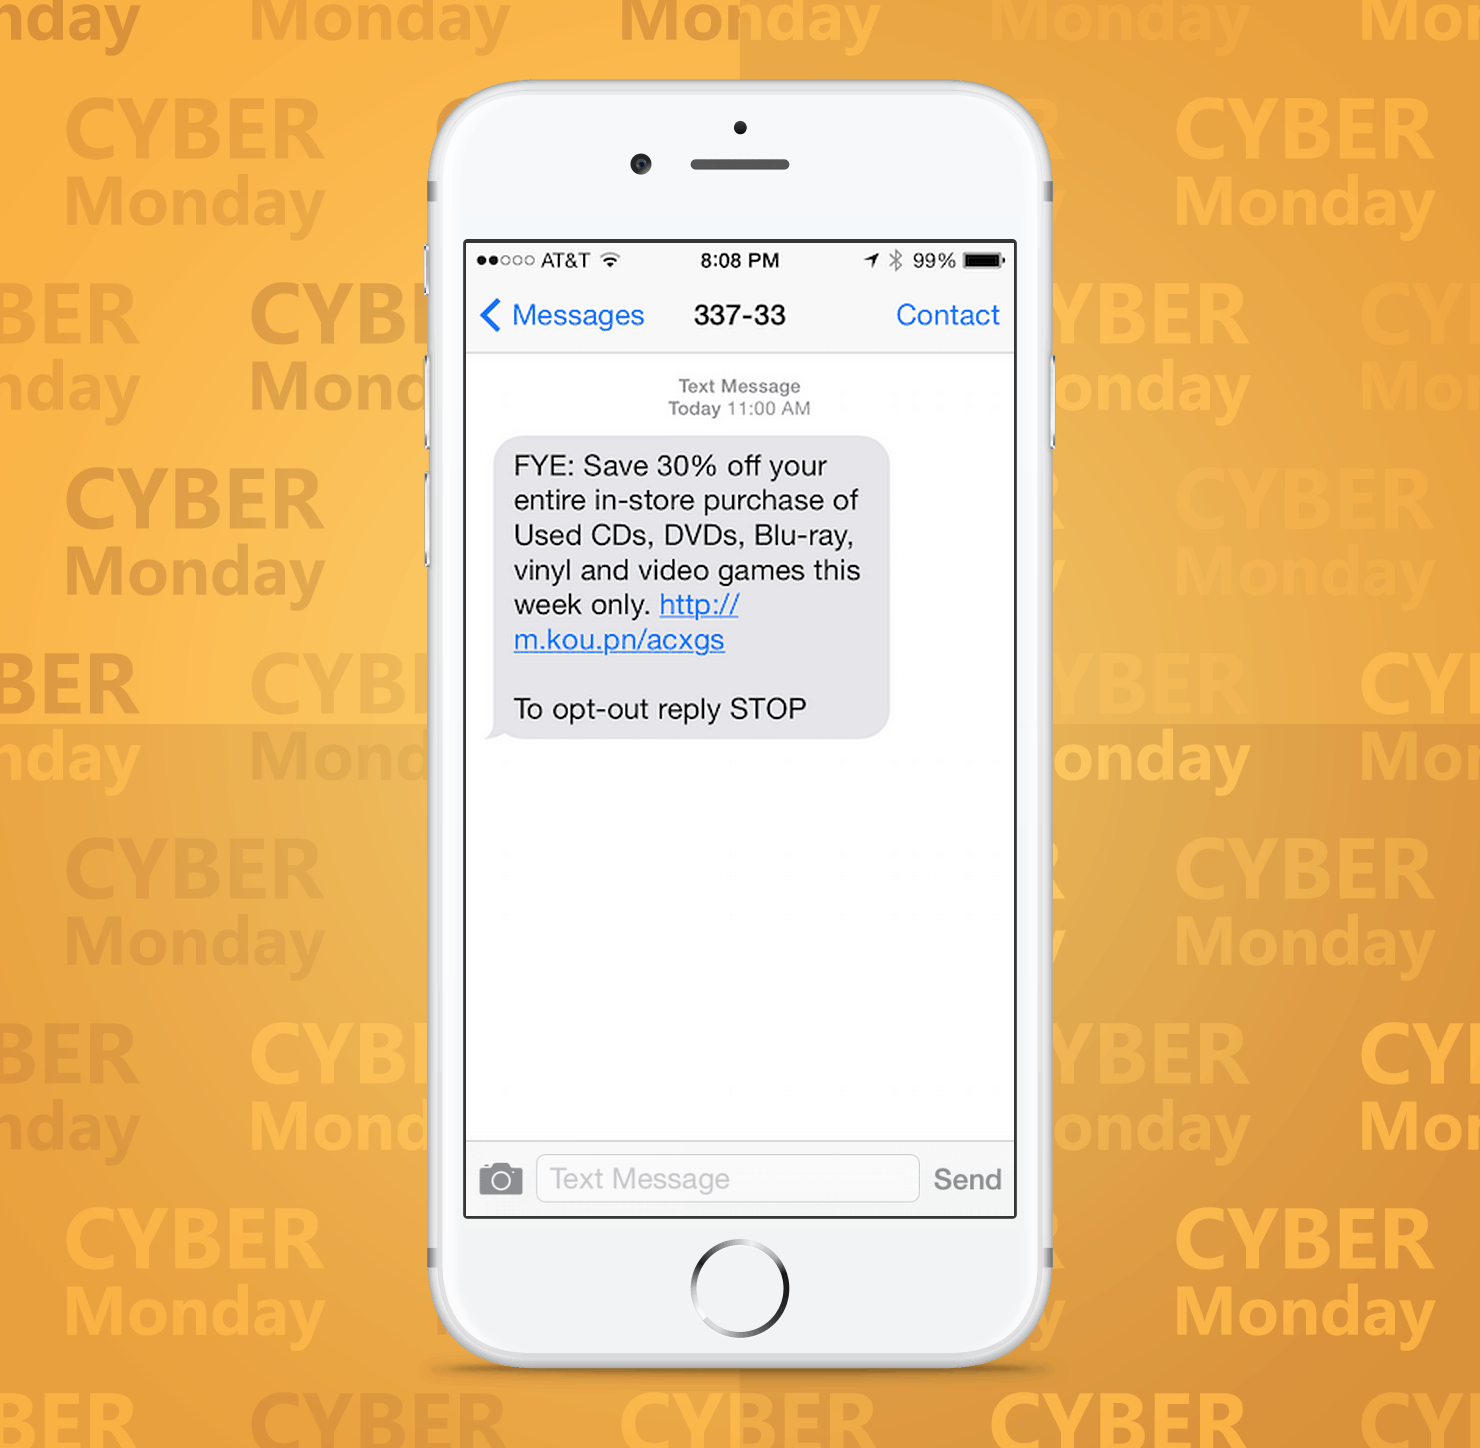 SMS Coupon Example Sent on Cyber Monday From FYE Retail Stores to Customers